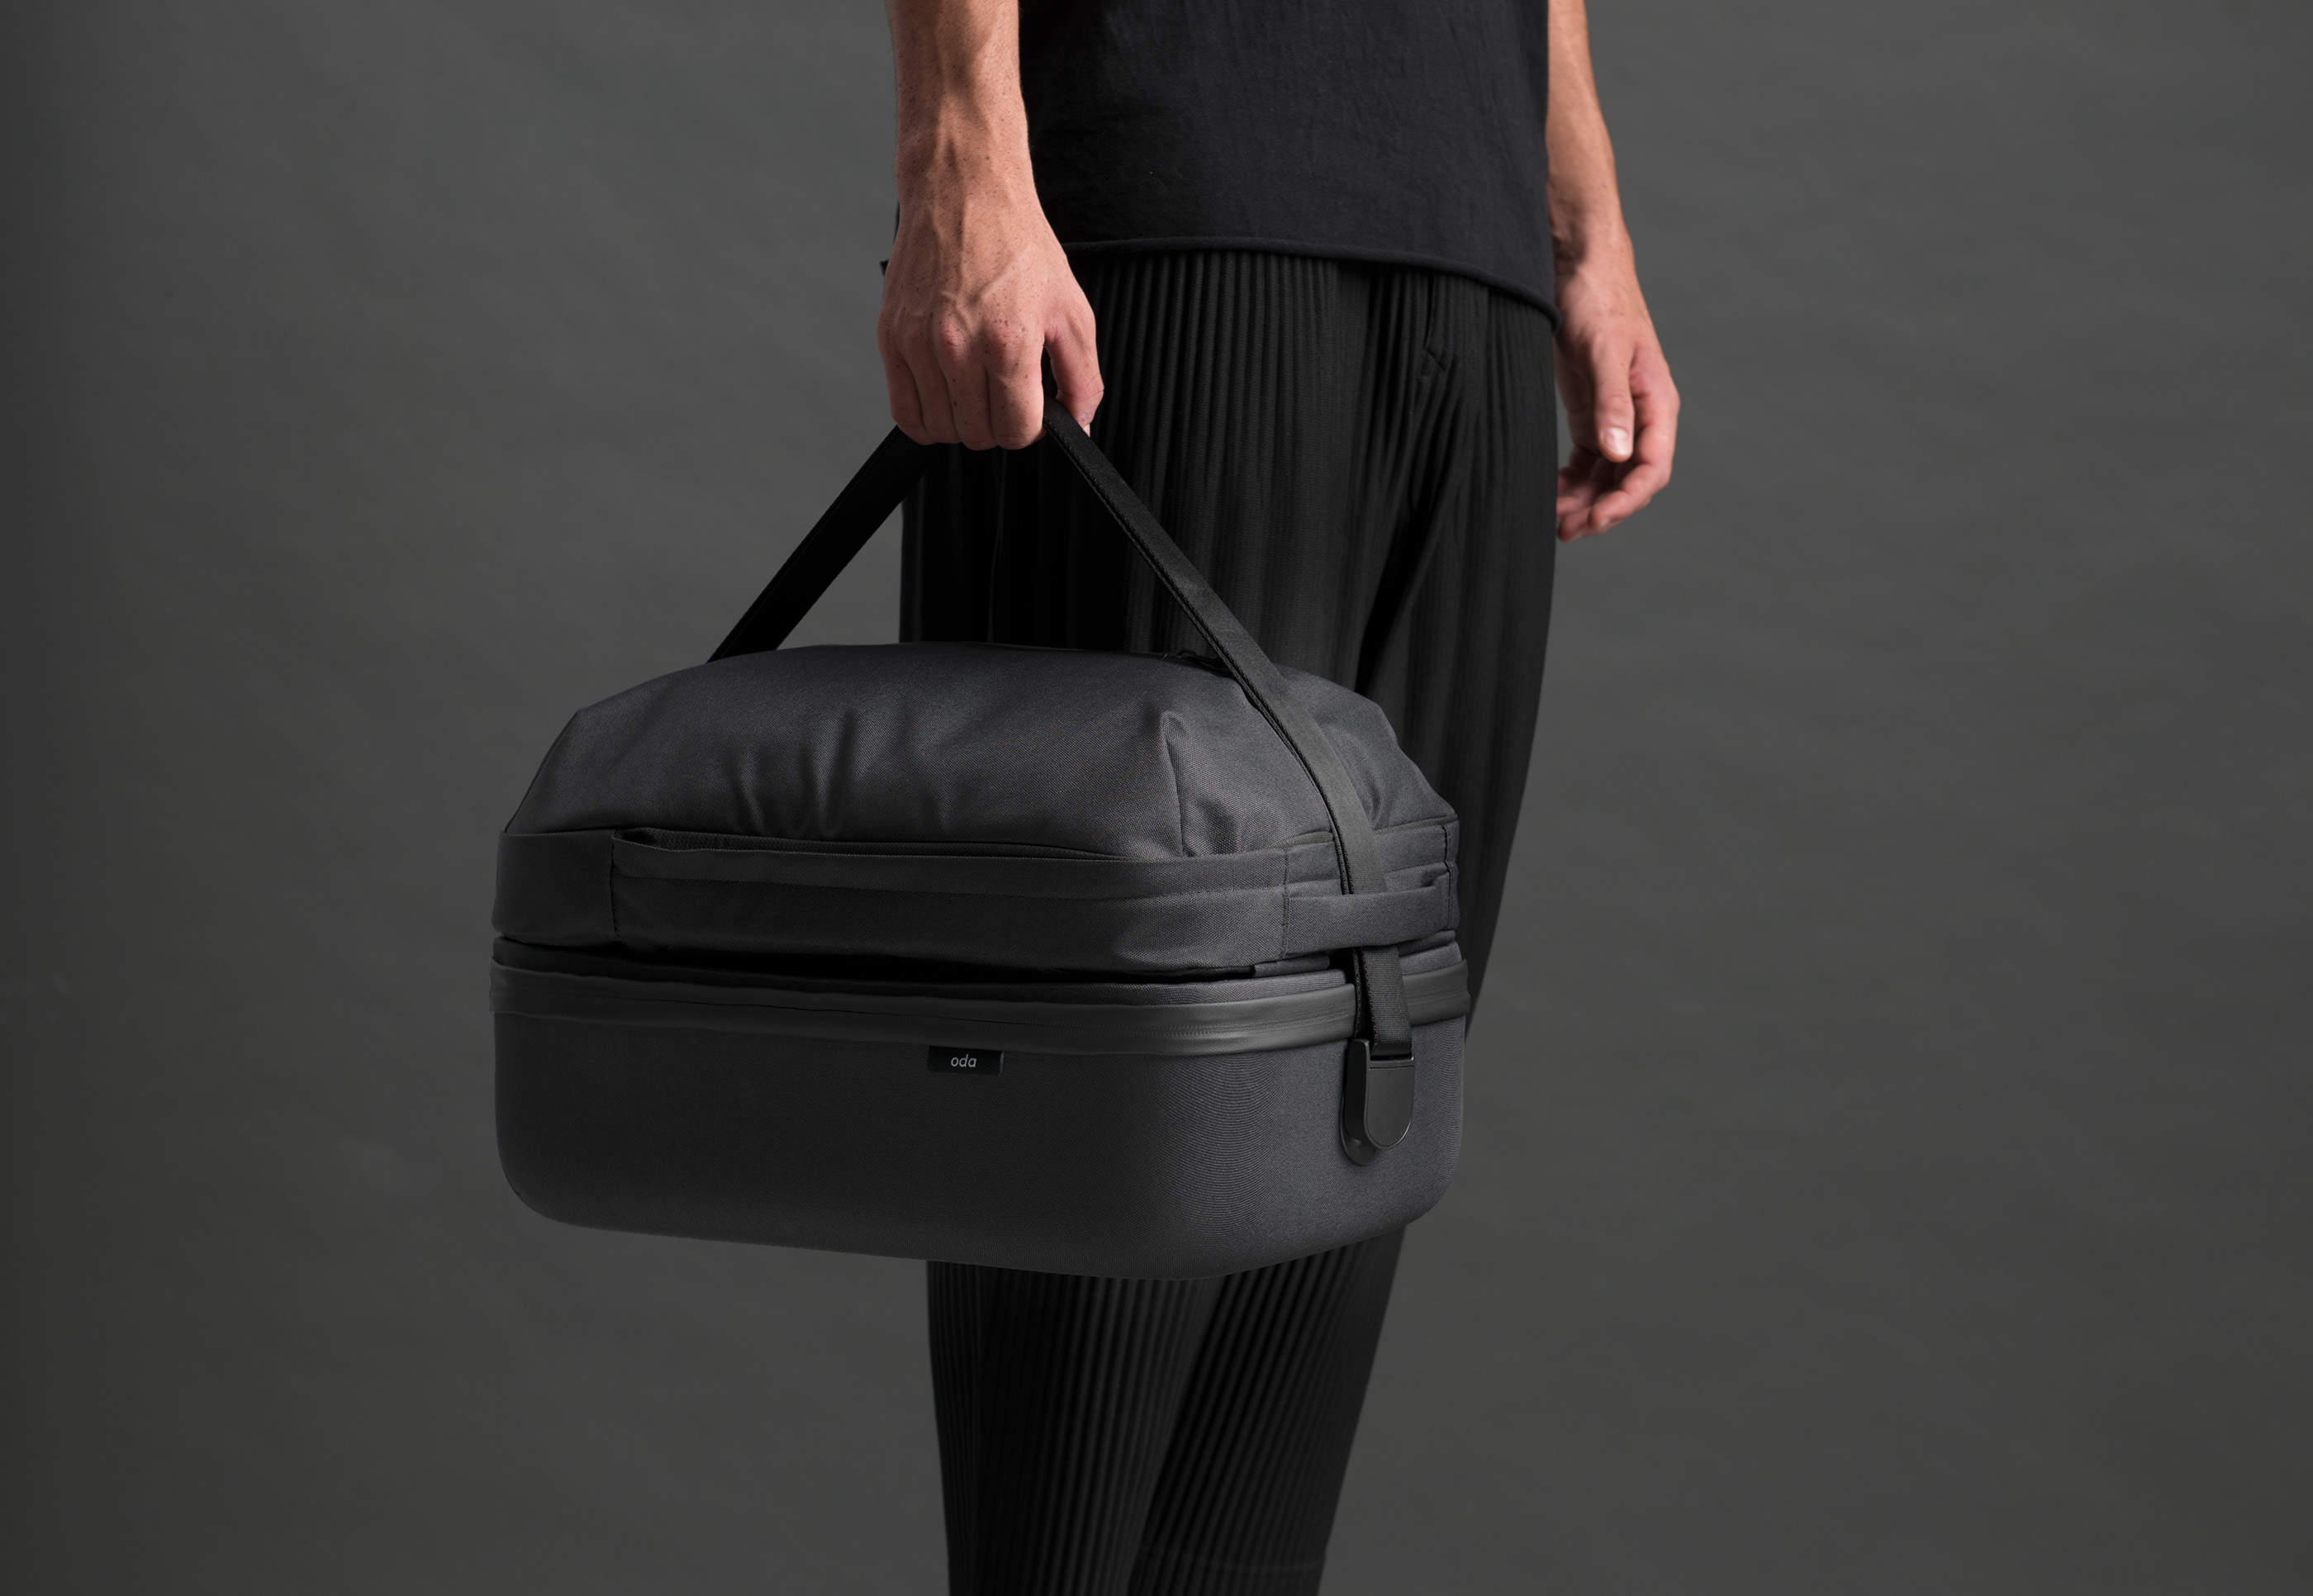 Hop, adaptable luggage can be utilized additionally as a backpack